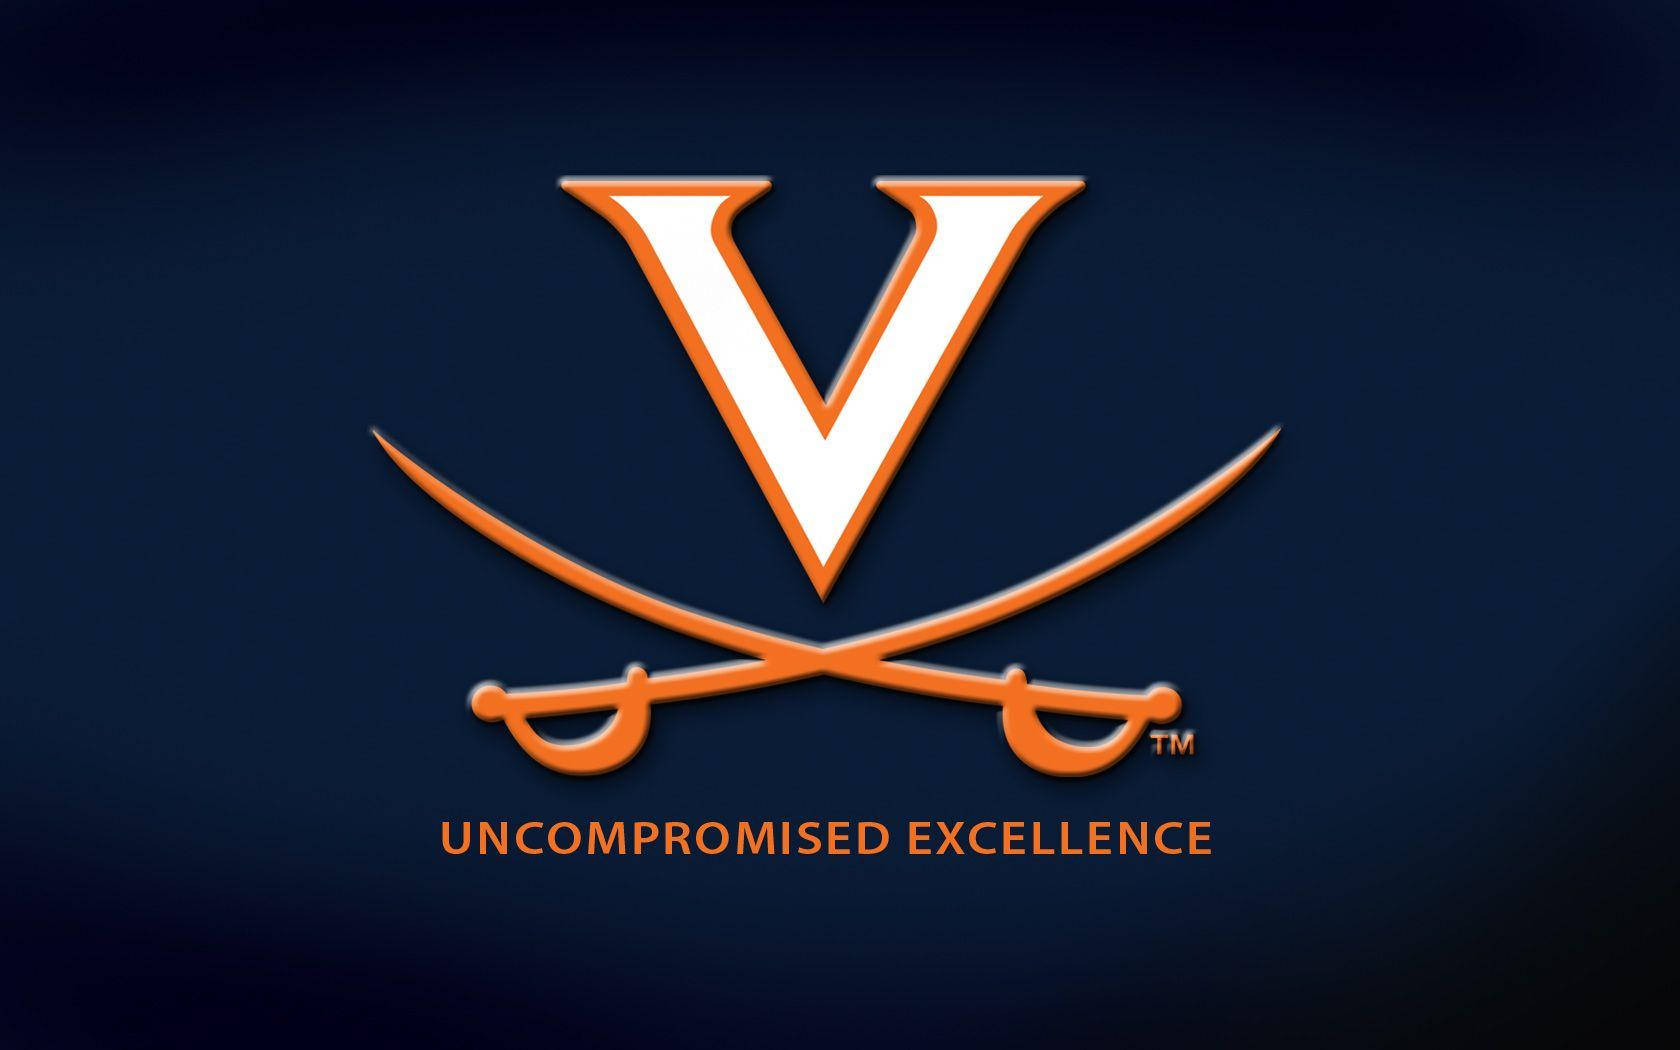 University Of Virginia Uncompromised Excellence Wallpaper